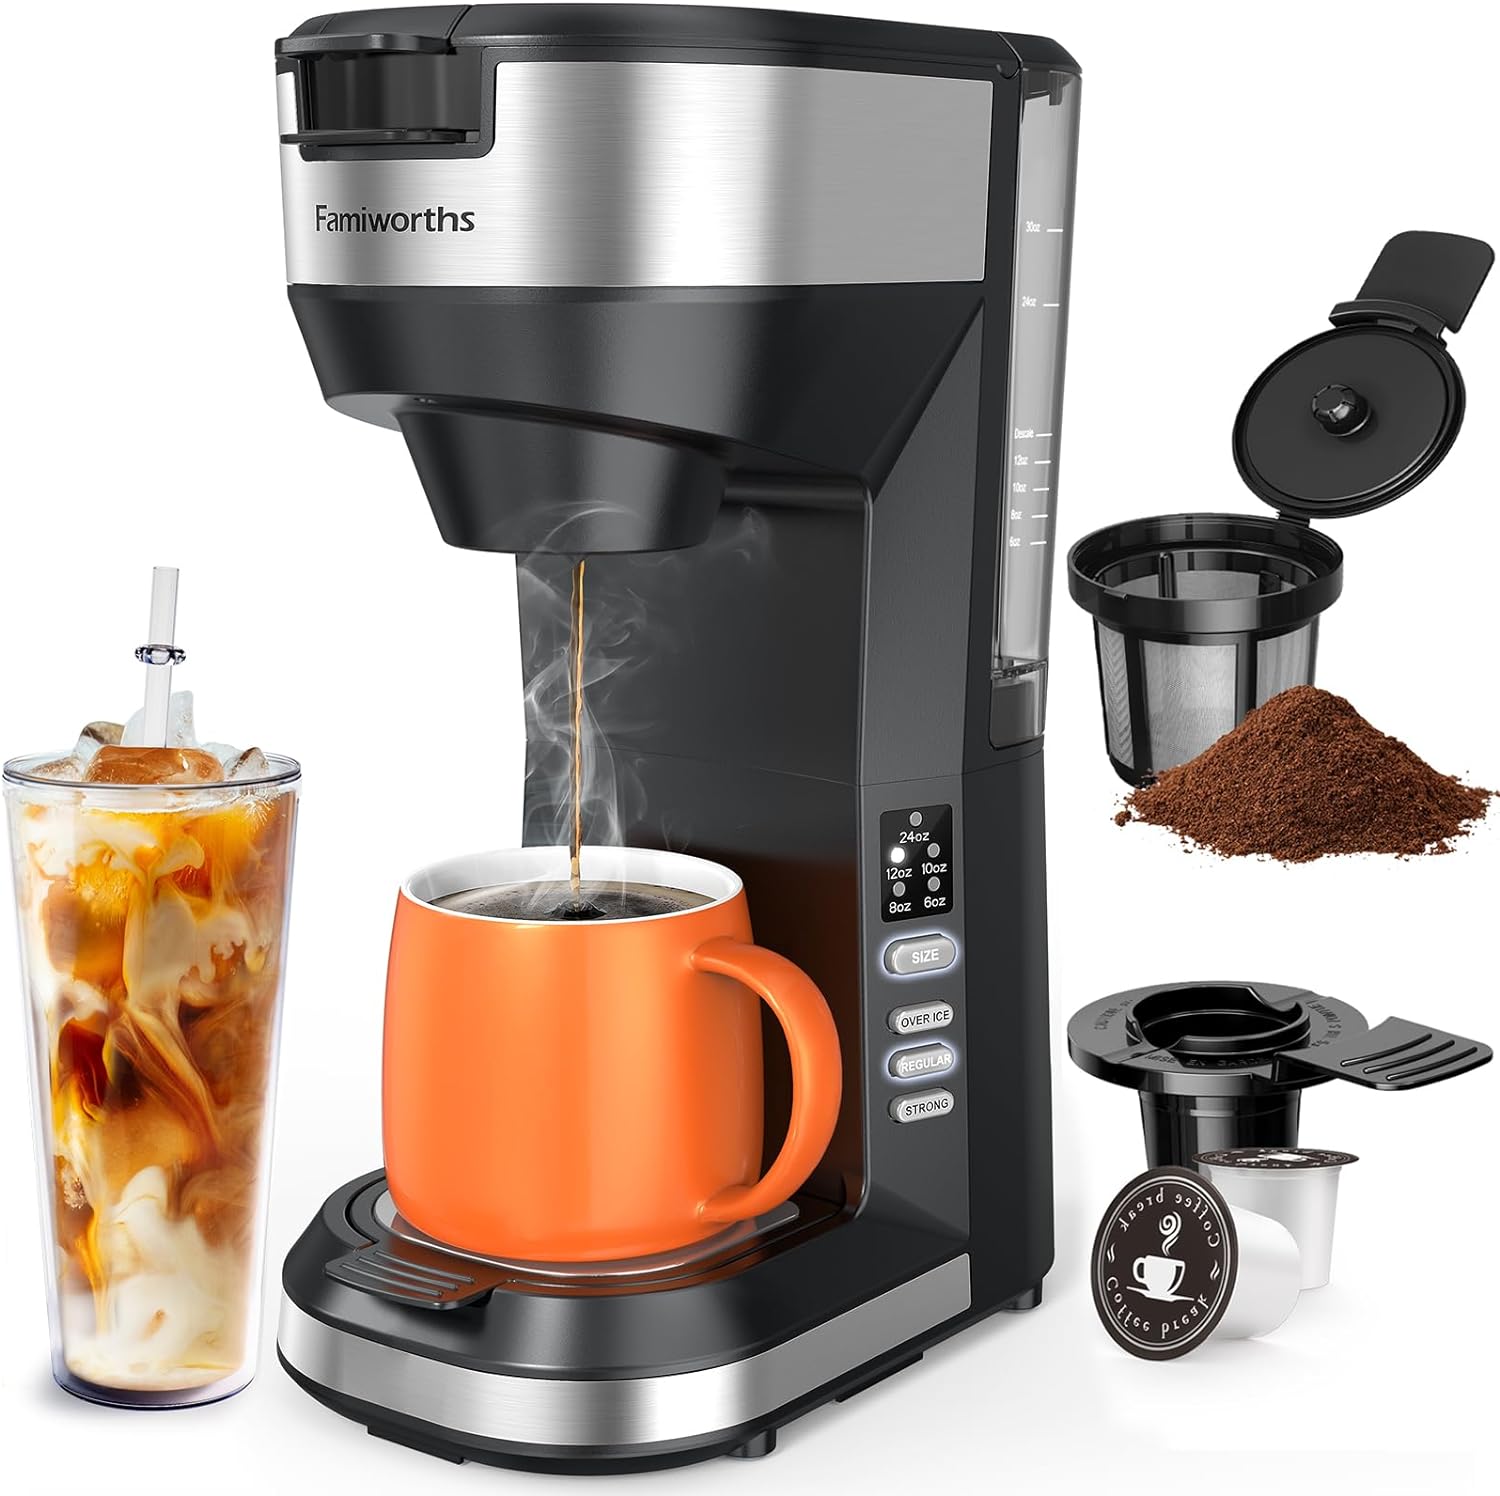 Hot and Iced Coffee Maker for K Cups and Ground Coffee, 4-5 Cups Coffee Maker and Single-serve Brewers, with 30Oz Removable Water Reservoir, 6 to 24Oz Cup Size, Pot and Tumbler Not Included, Black: Home  Kitchen